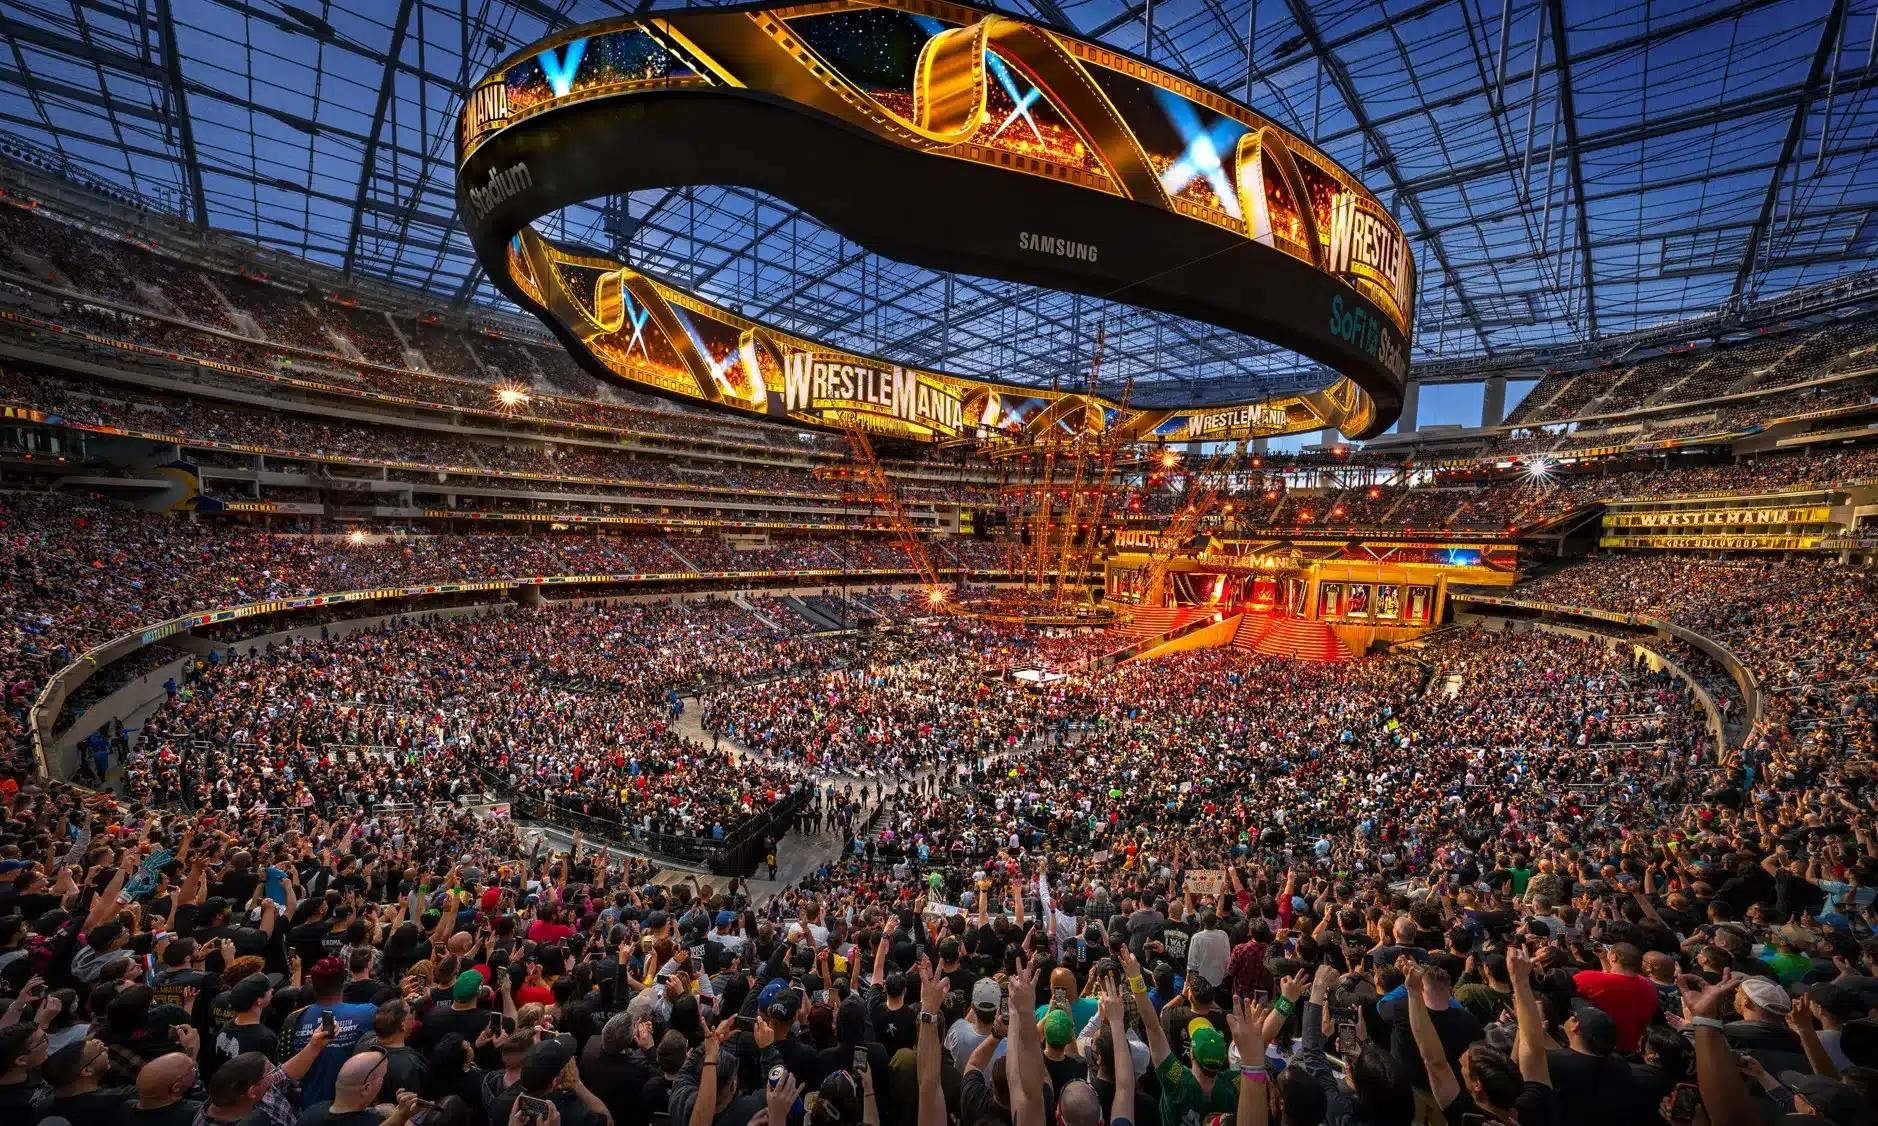 Indianapolis will be the Home for Upcoming WWE WrestleMania, Royal Rumble, and SummerSlam Events.